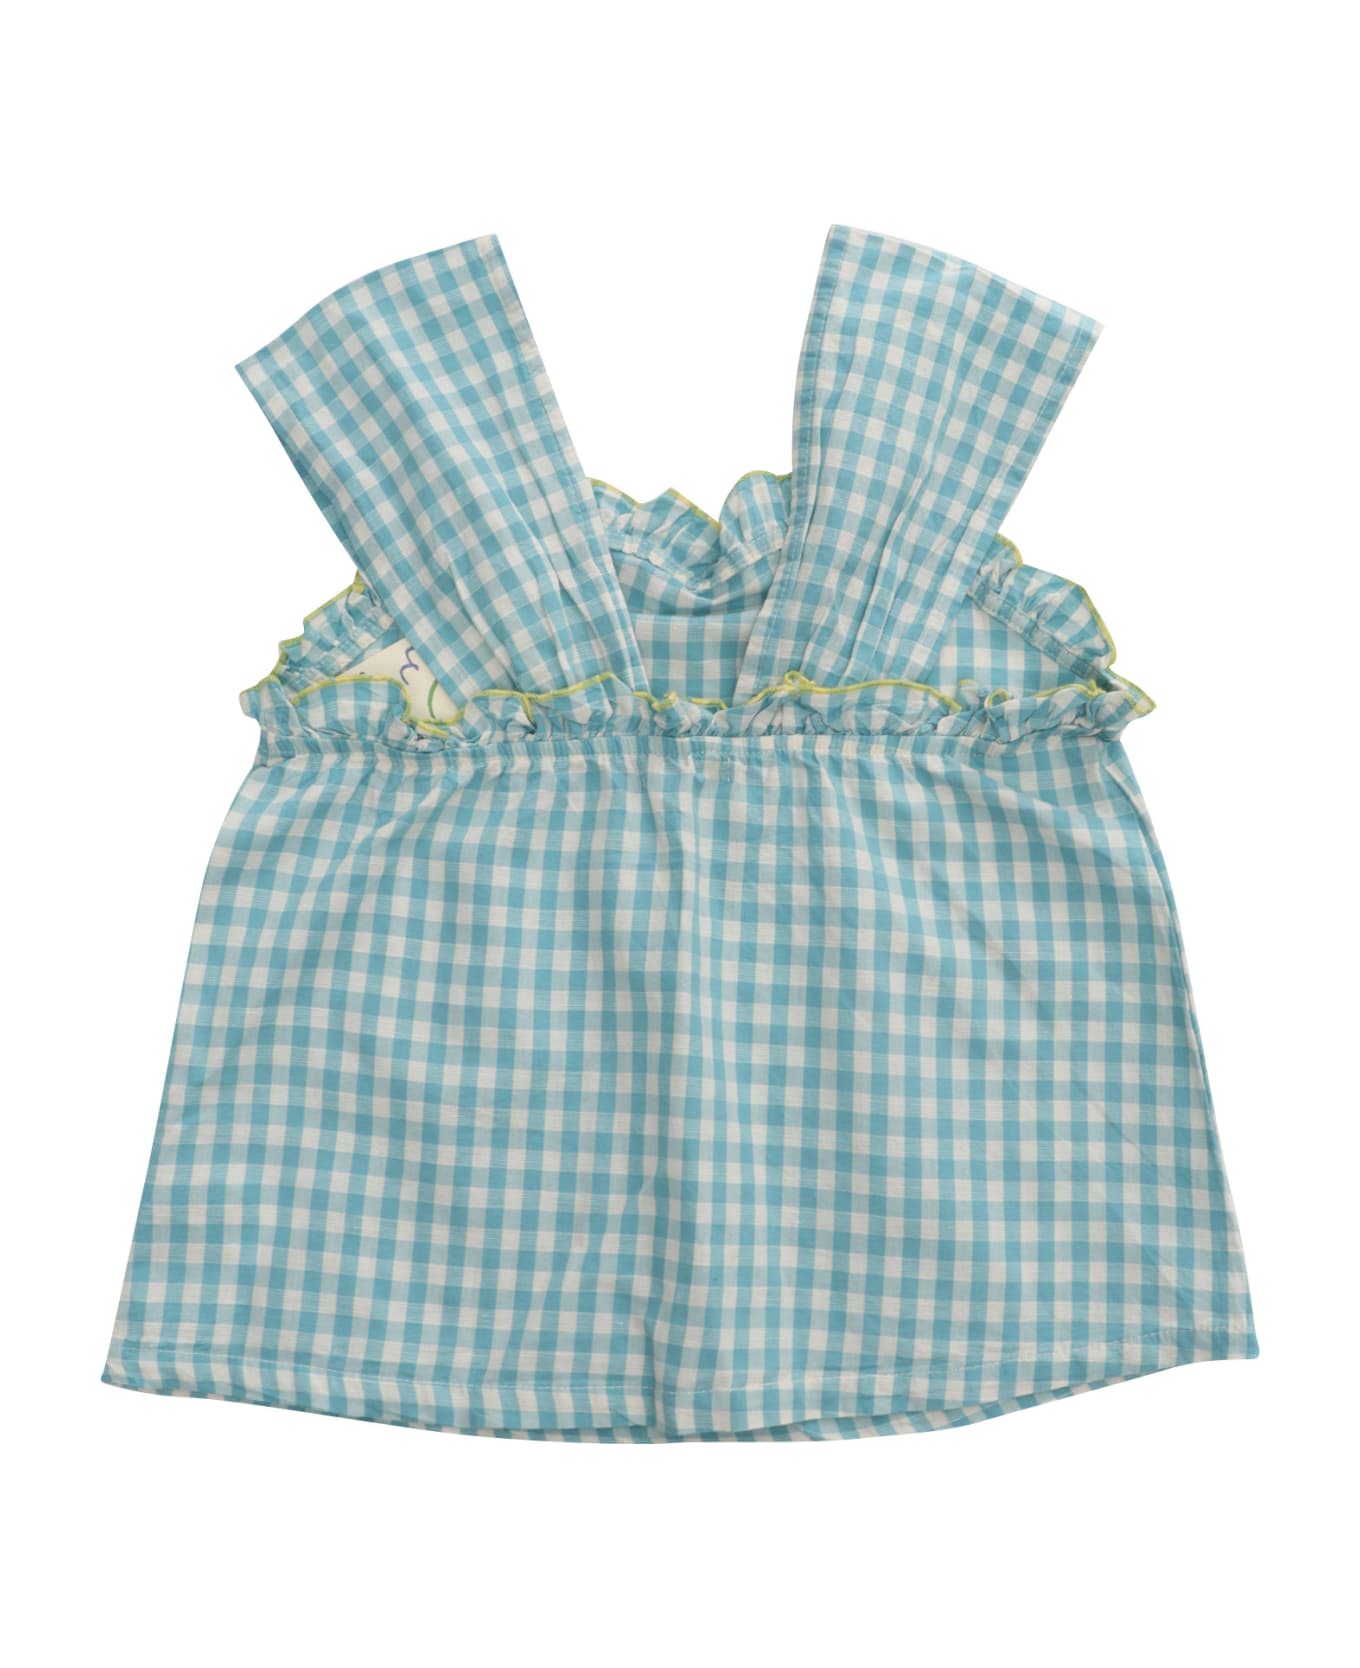 Bobo Choses Checked Patterned Top - LIGHT BLUE シャツ